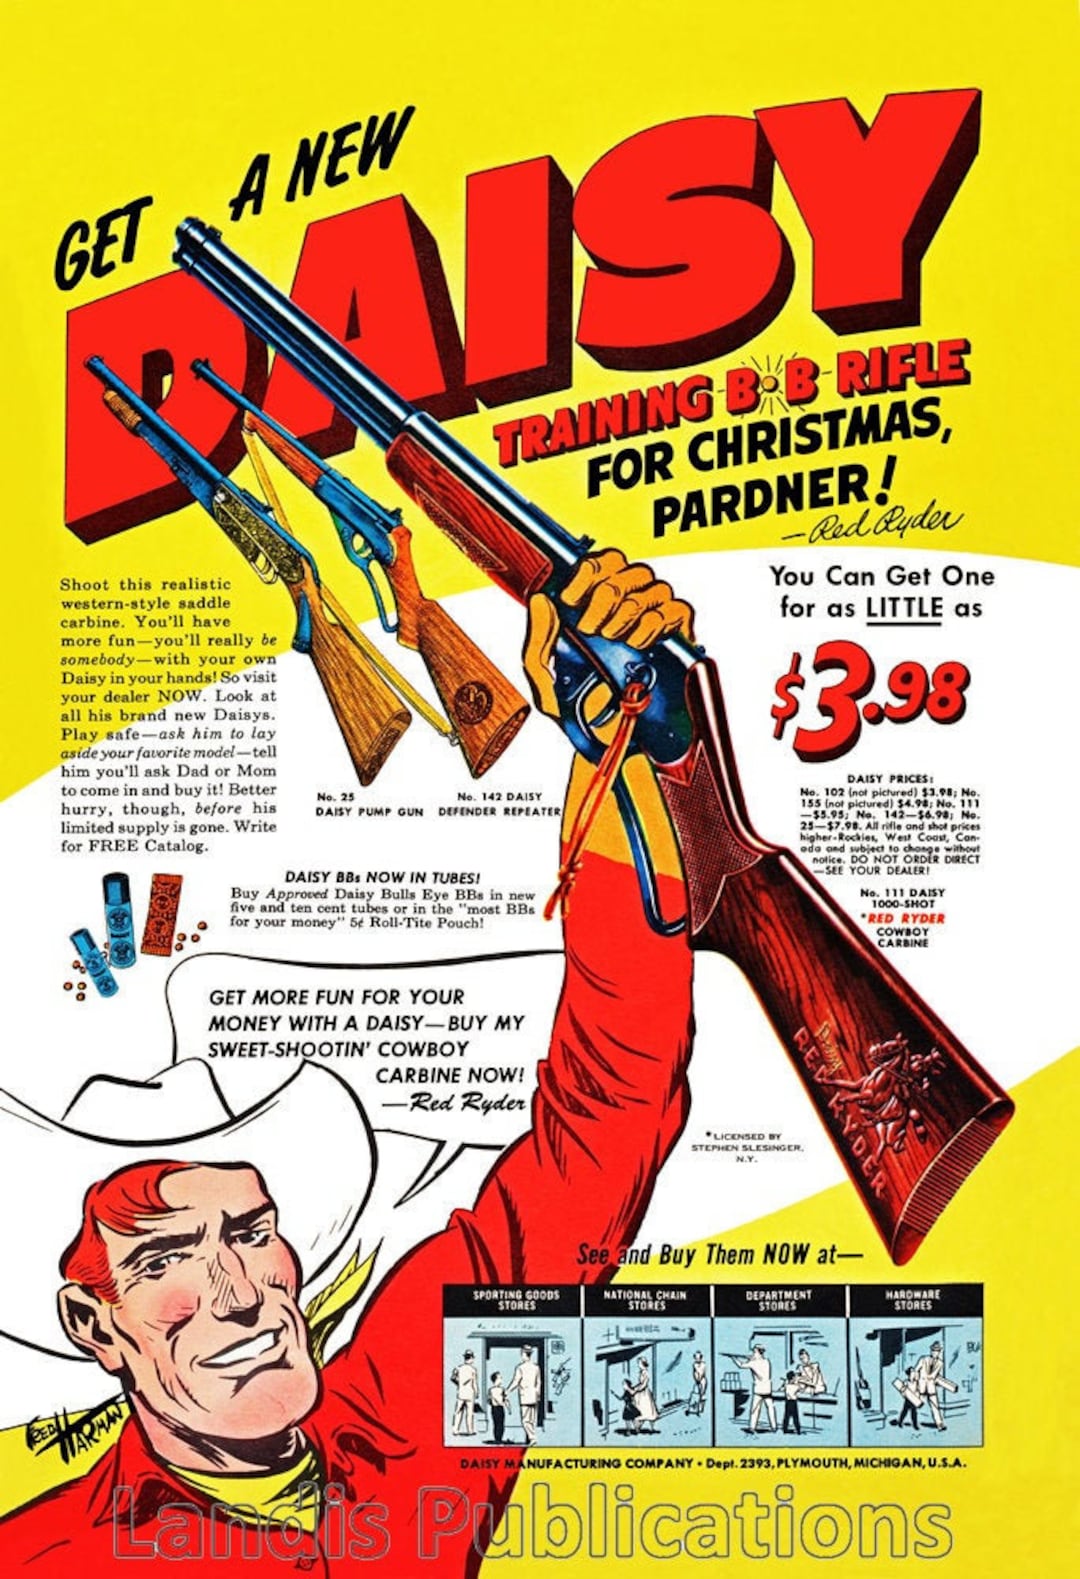 1953 Red Ryder Daisy Bb Carbine Rifle Poster Etsy